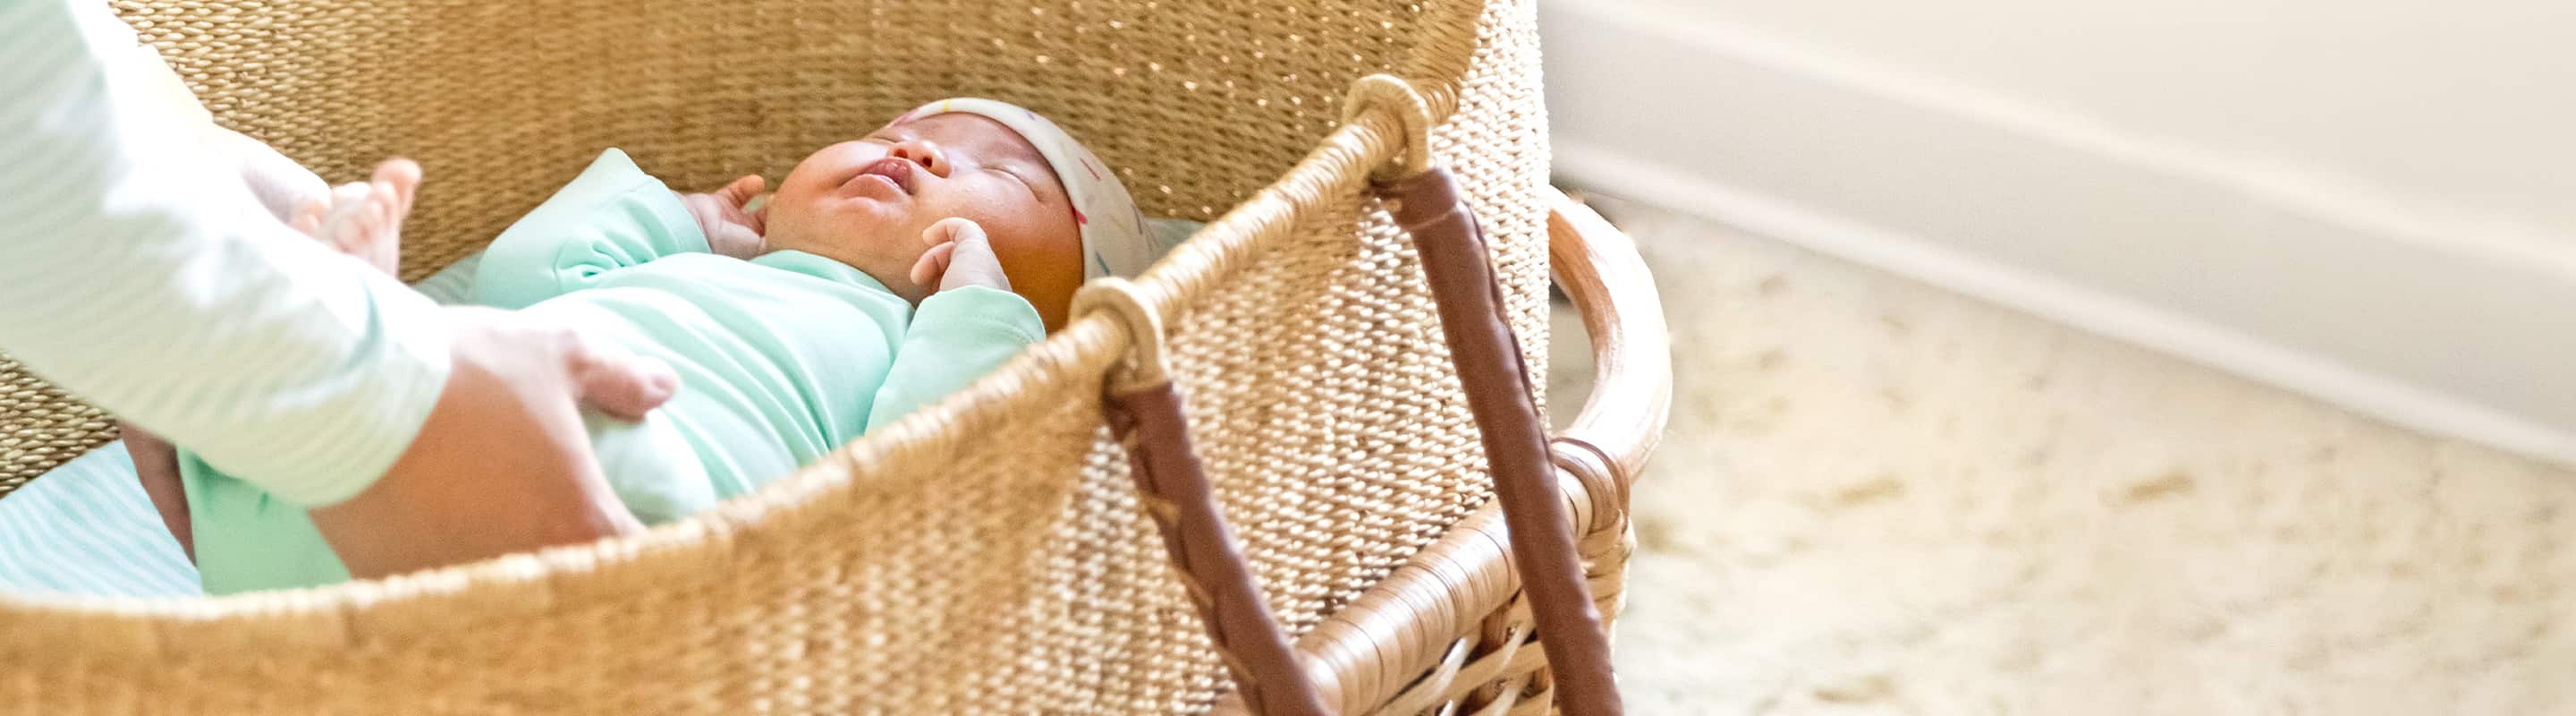 mother reaching for baby in wicker bassinet